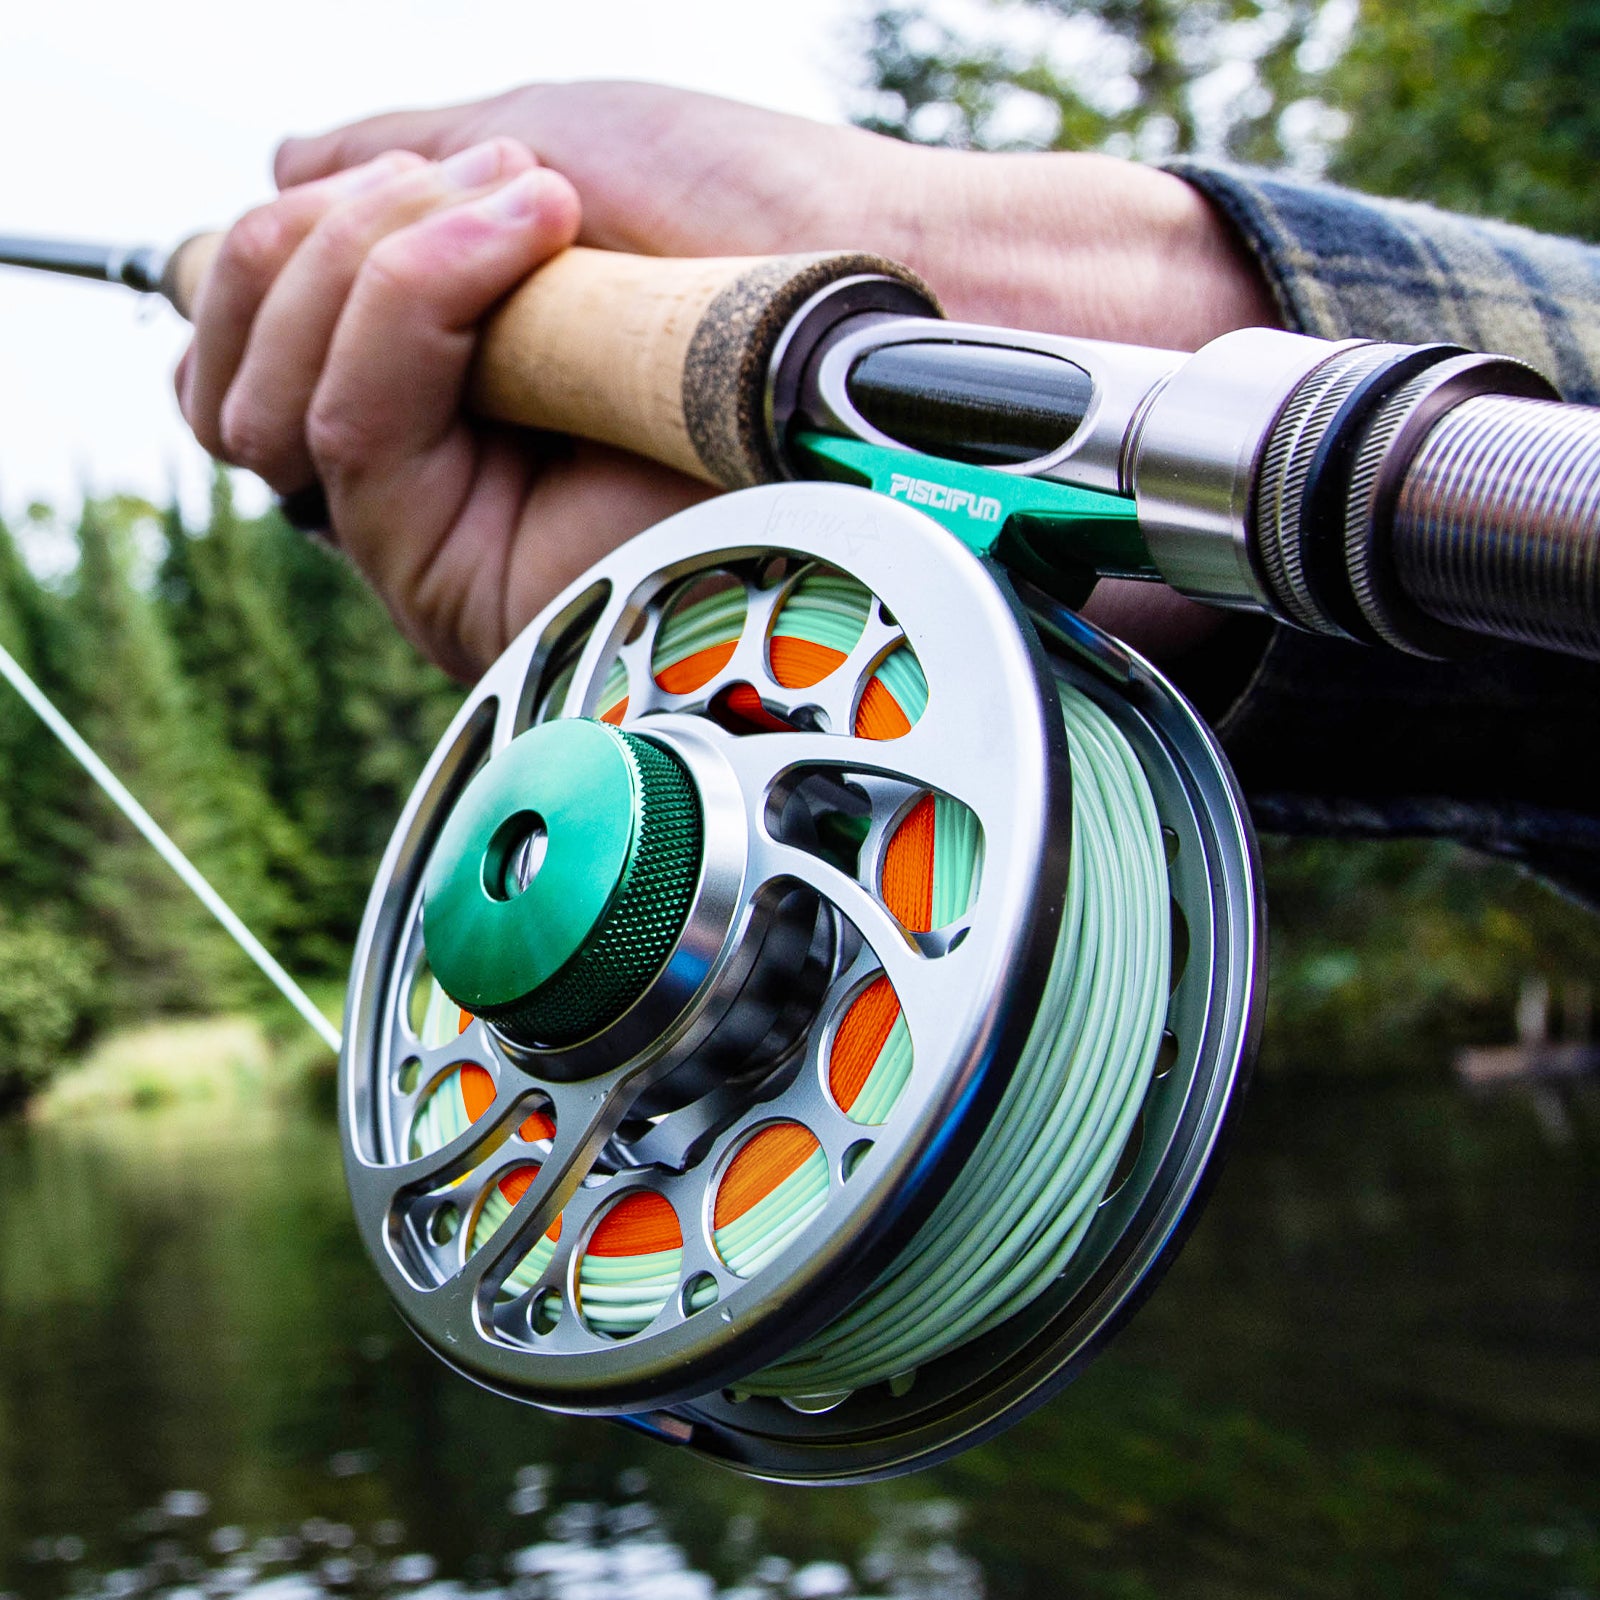 Piscifun Sword Fly Fishing Reel, CNC-Machined Aluminum Alloy Fly Reel